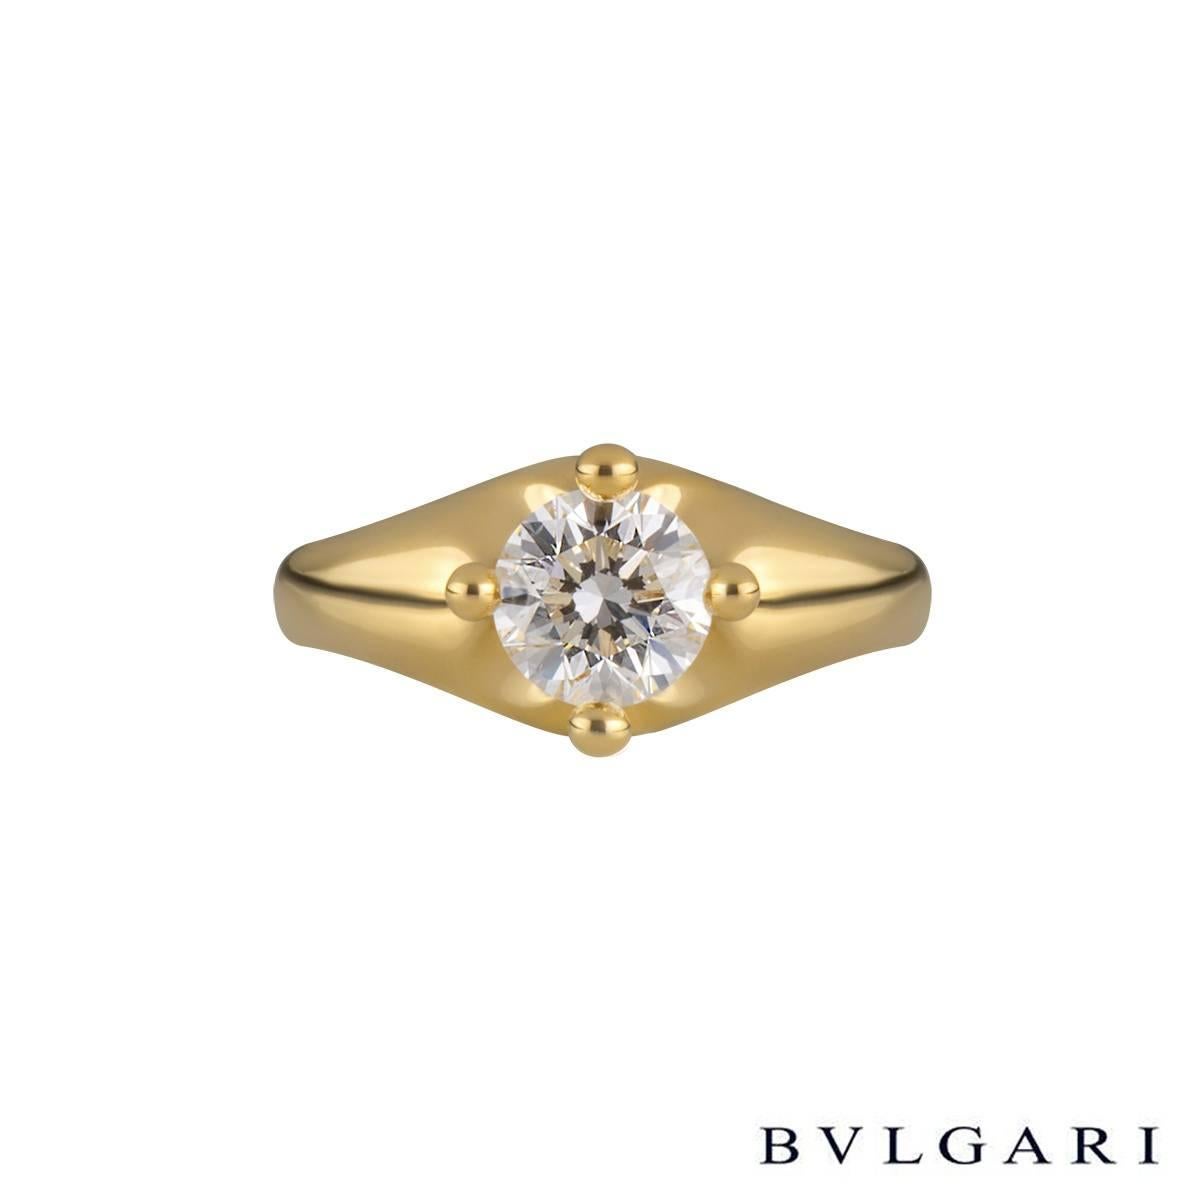 A stunning diamond single stone ring in 18k yellow gold by Bvlgari. The ring is set to the centre with a 1.01ct round brilliant cut diamond in a raised four claw compass setting, D in colour and VVS1 in clarity. The tapered 8mm ring is currently a